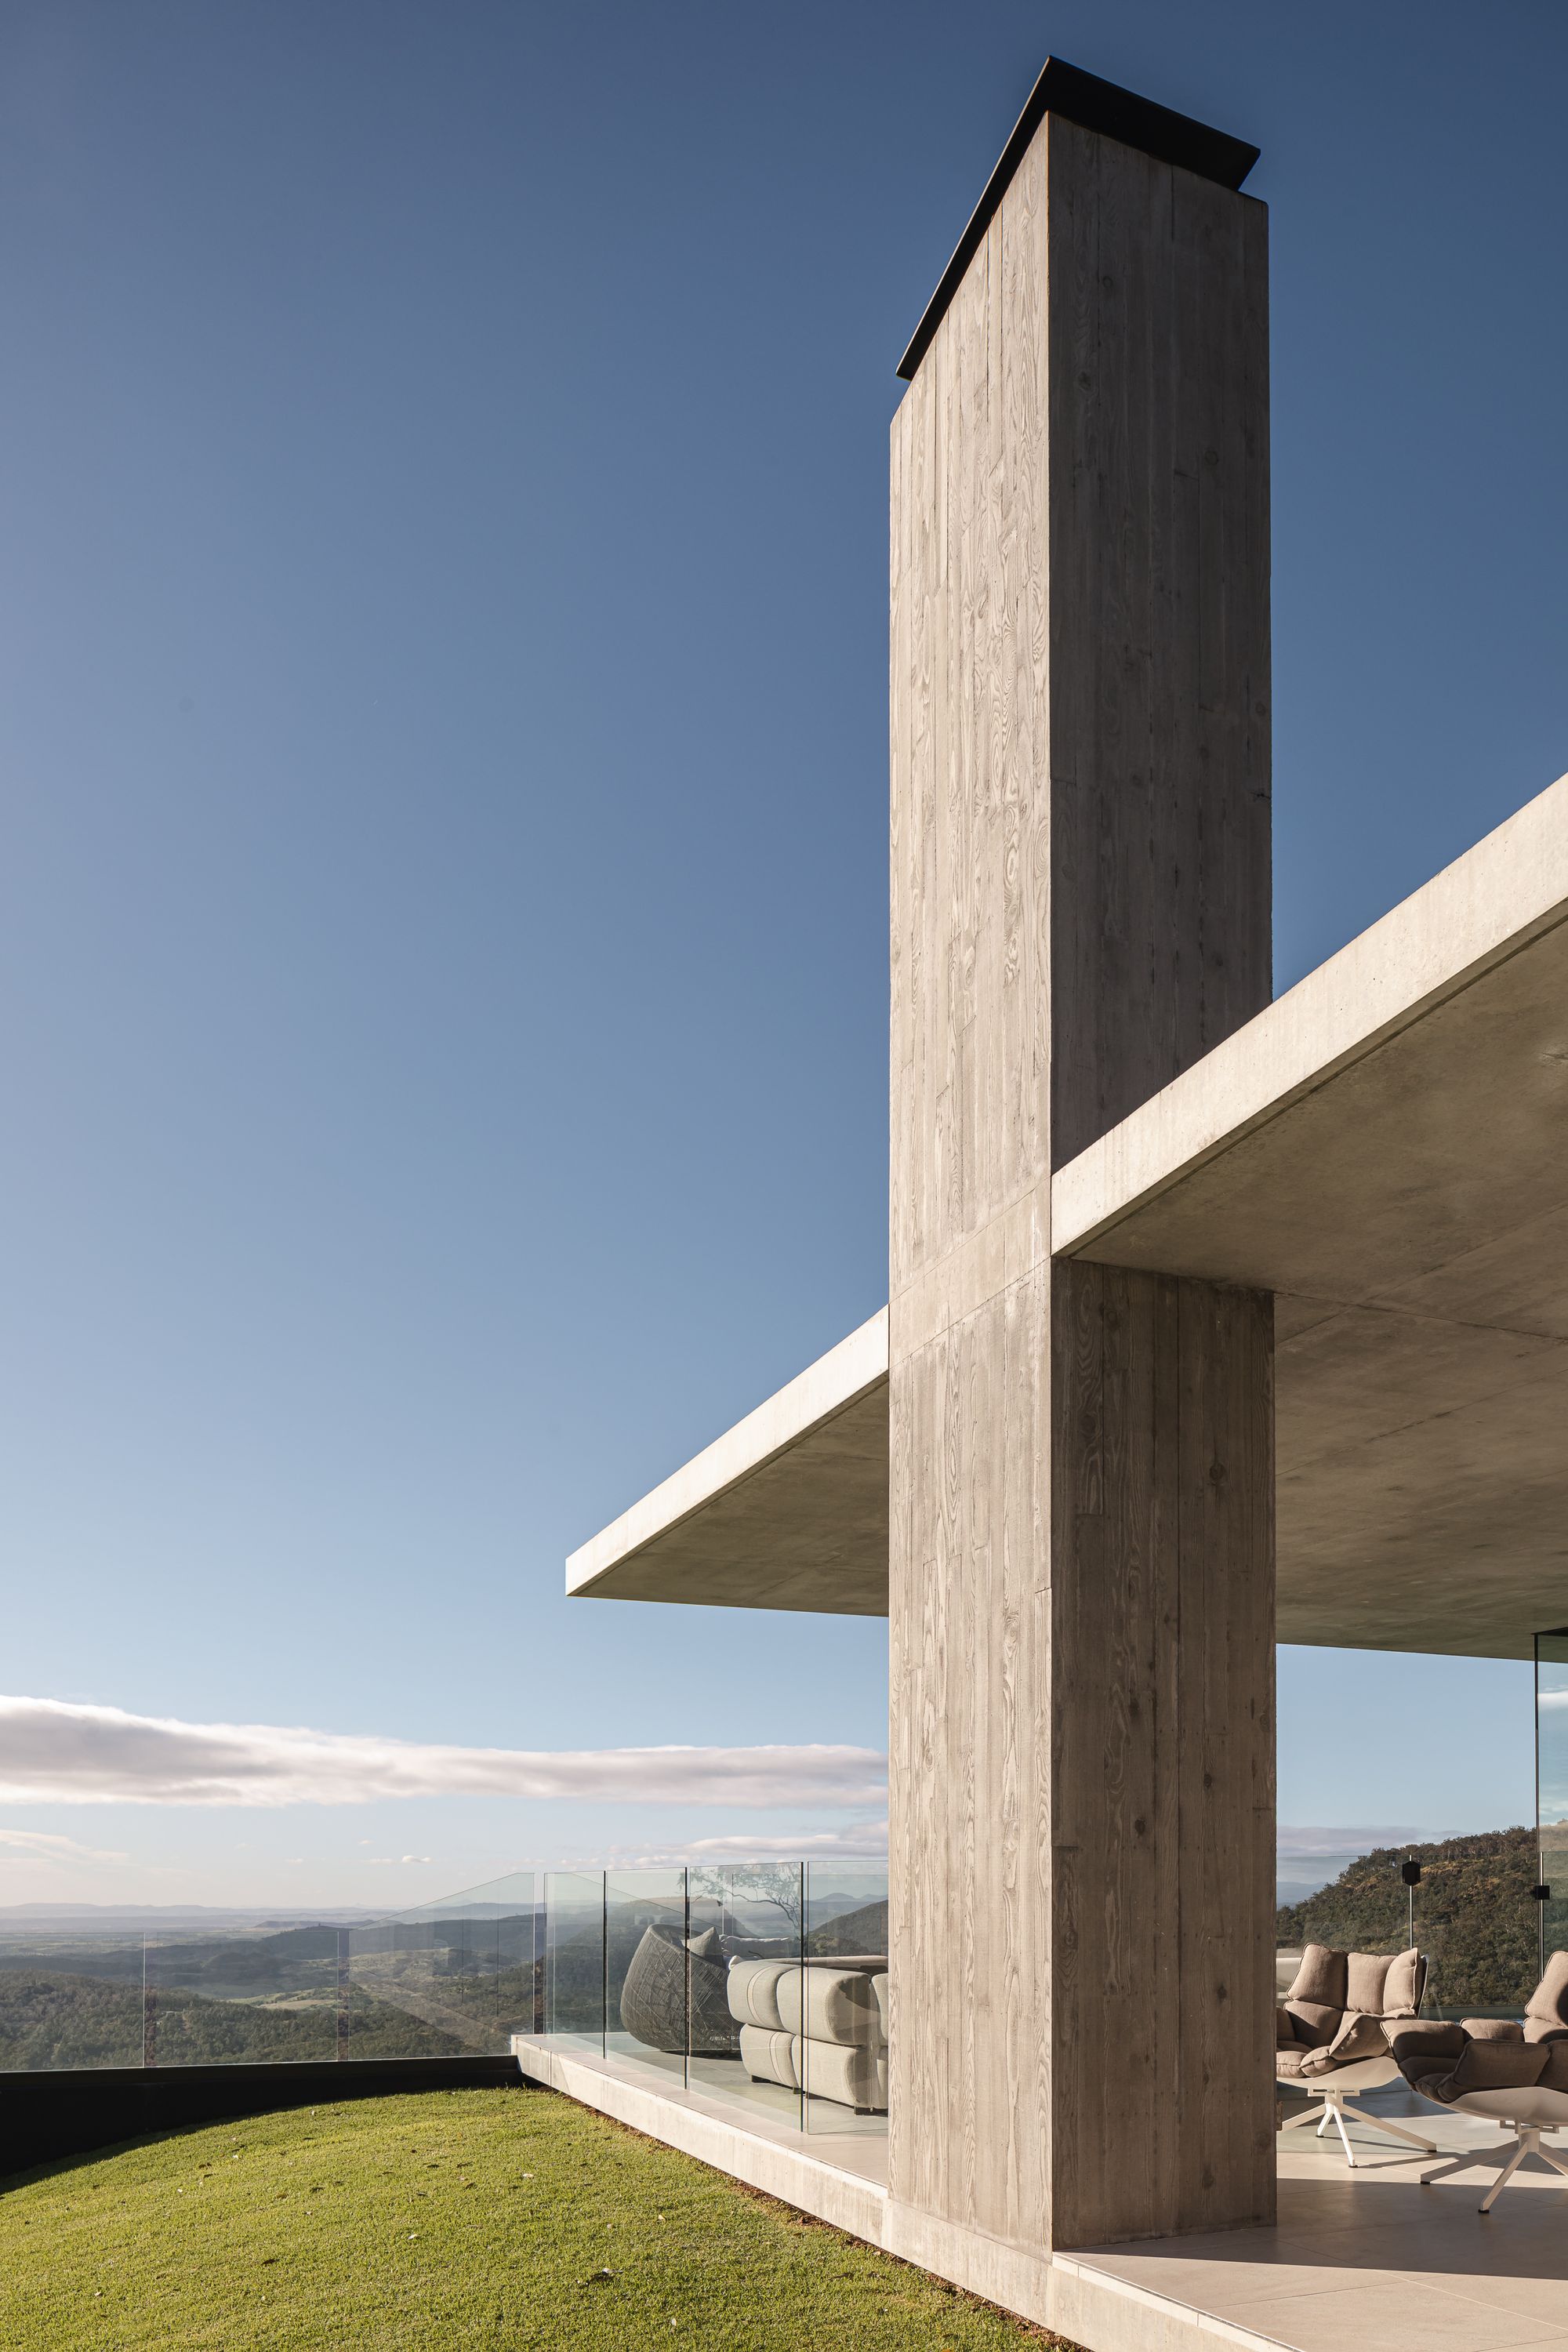 Cliffhanger by Joe Adsett Architects showing a close up view of the concrete chimney and outdoor space